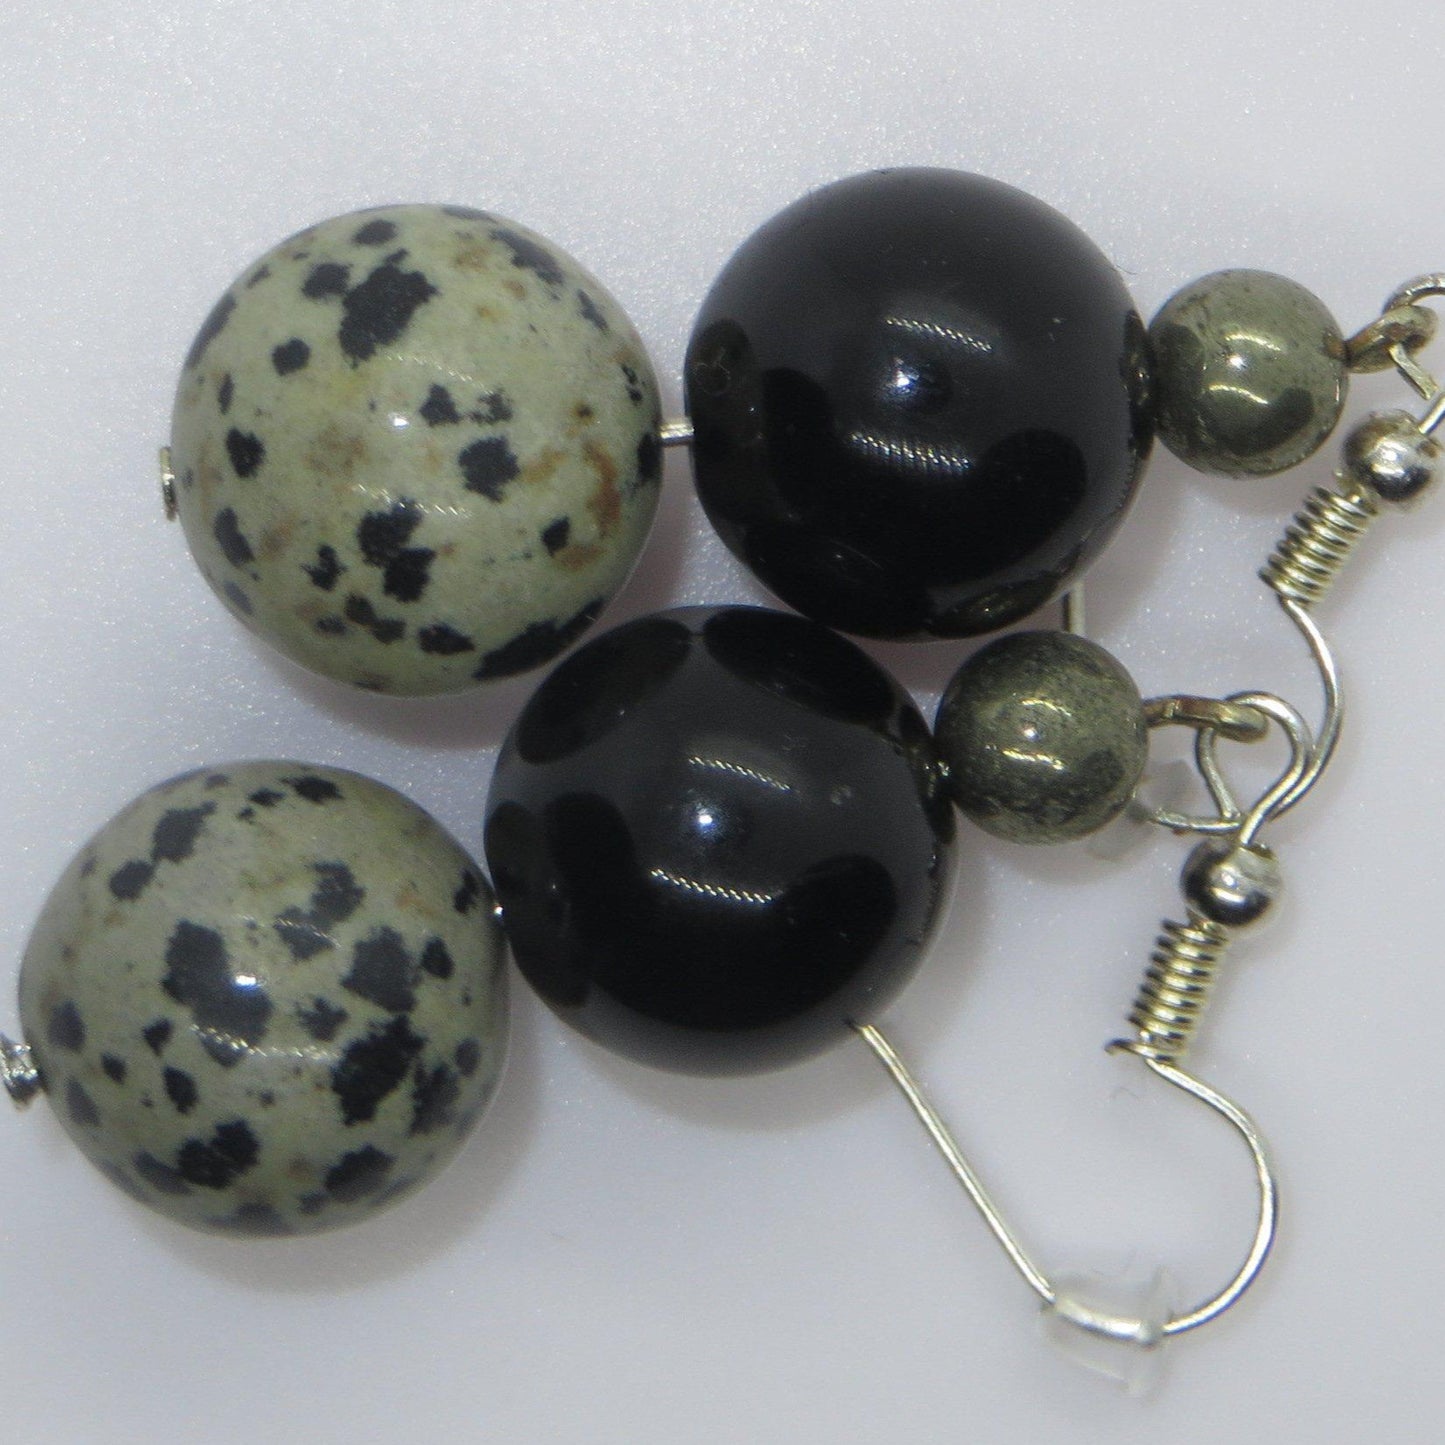 easy to wear earrings of dalmation stone, pyrite and gold obsidian